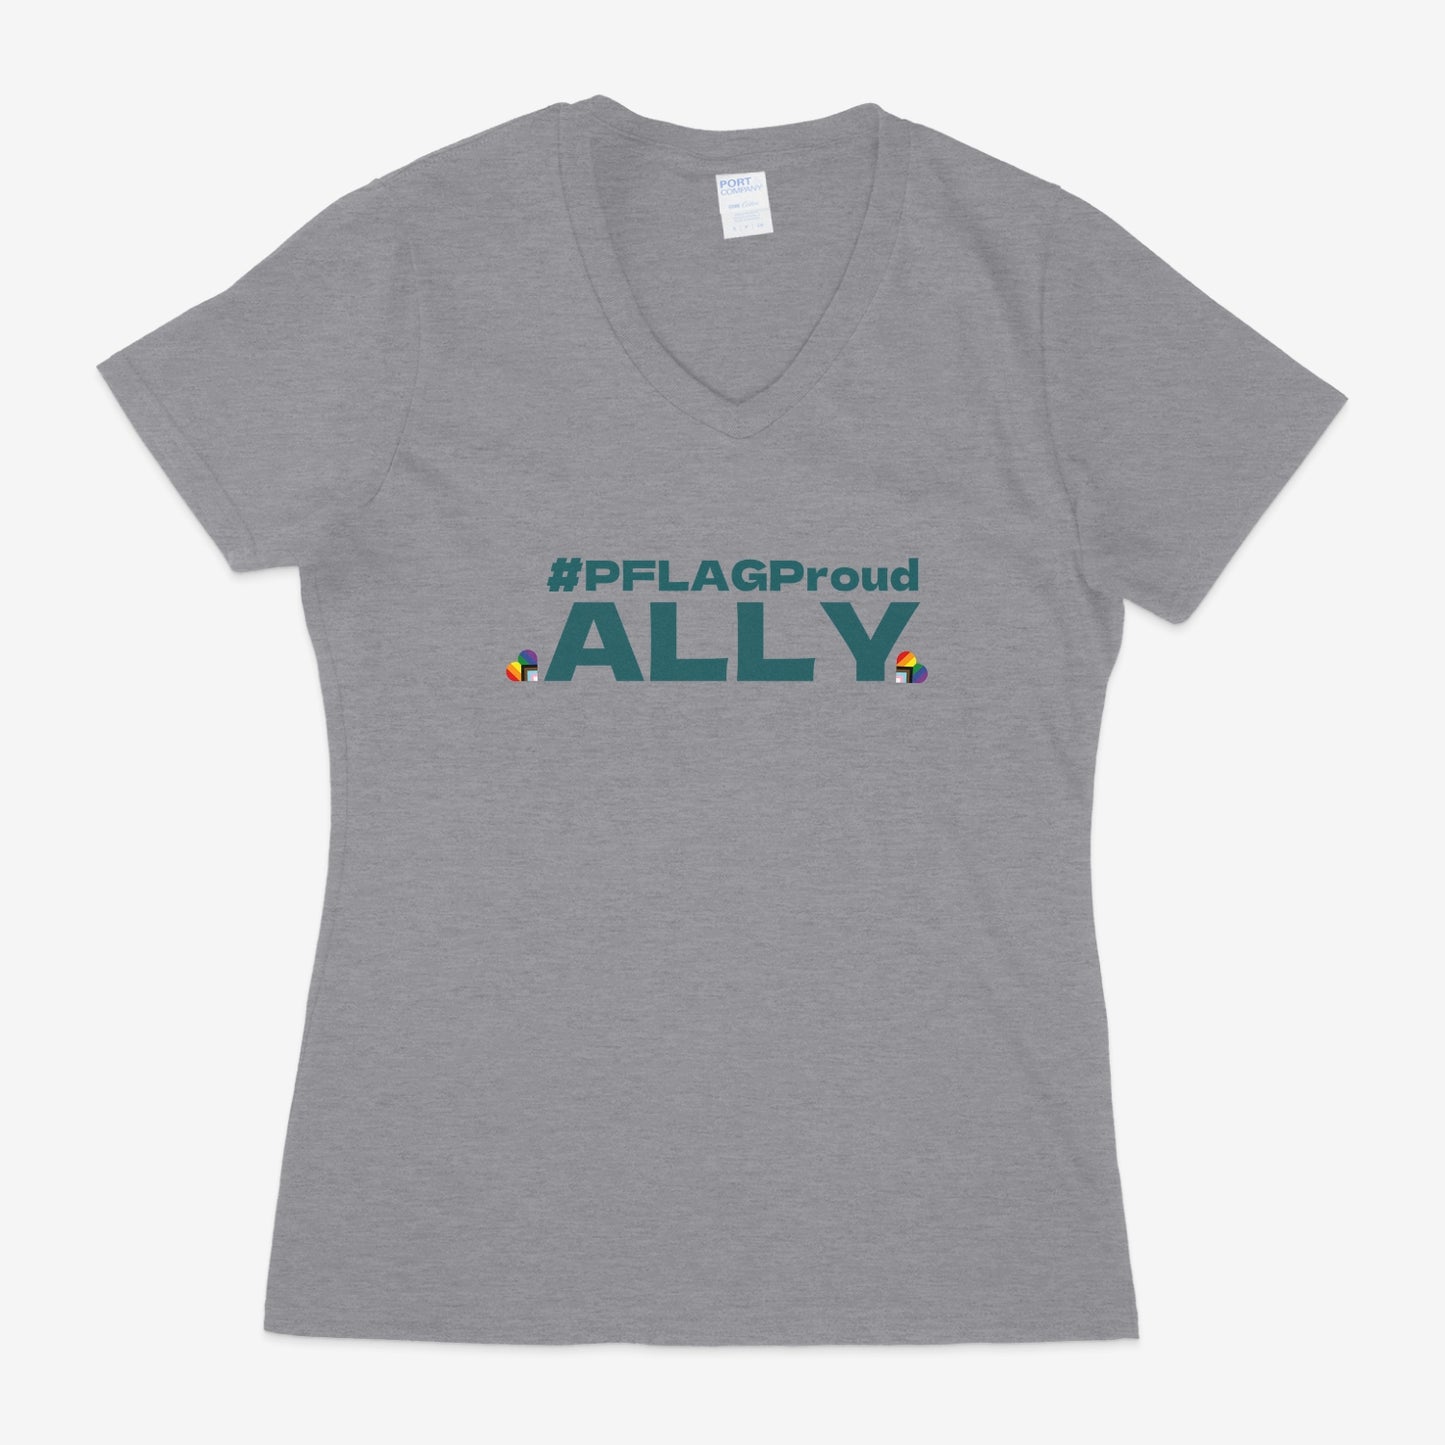 #PFLAGProud Ally - Fitted-Cut V-Neck Short Sleeve T-Shirt